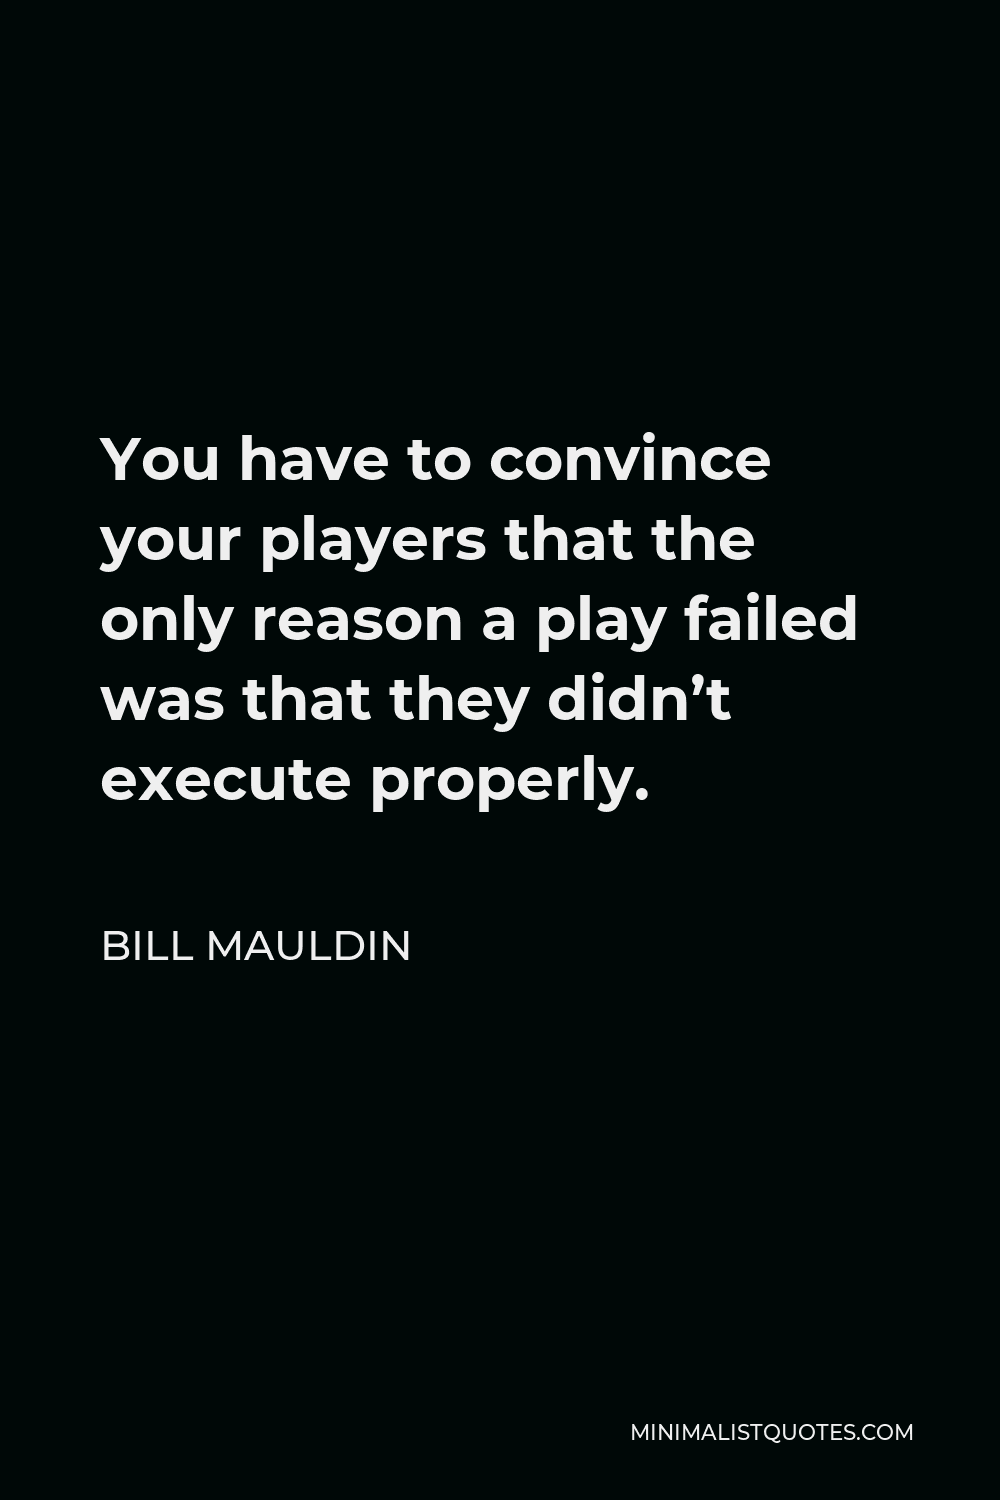 Bill Mauldin Quote - You have to convince your players that the only reason a play failed was that they didn’t execute properly.